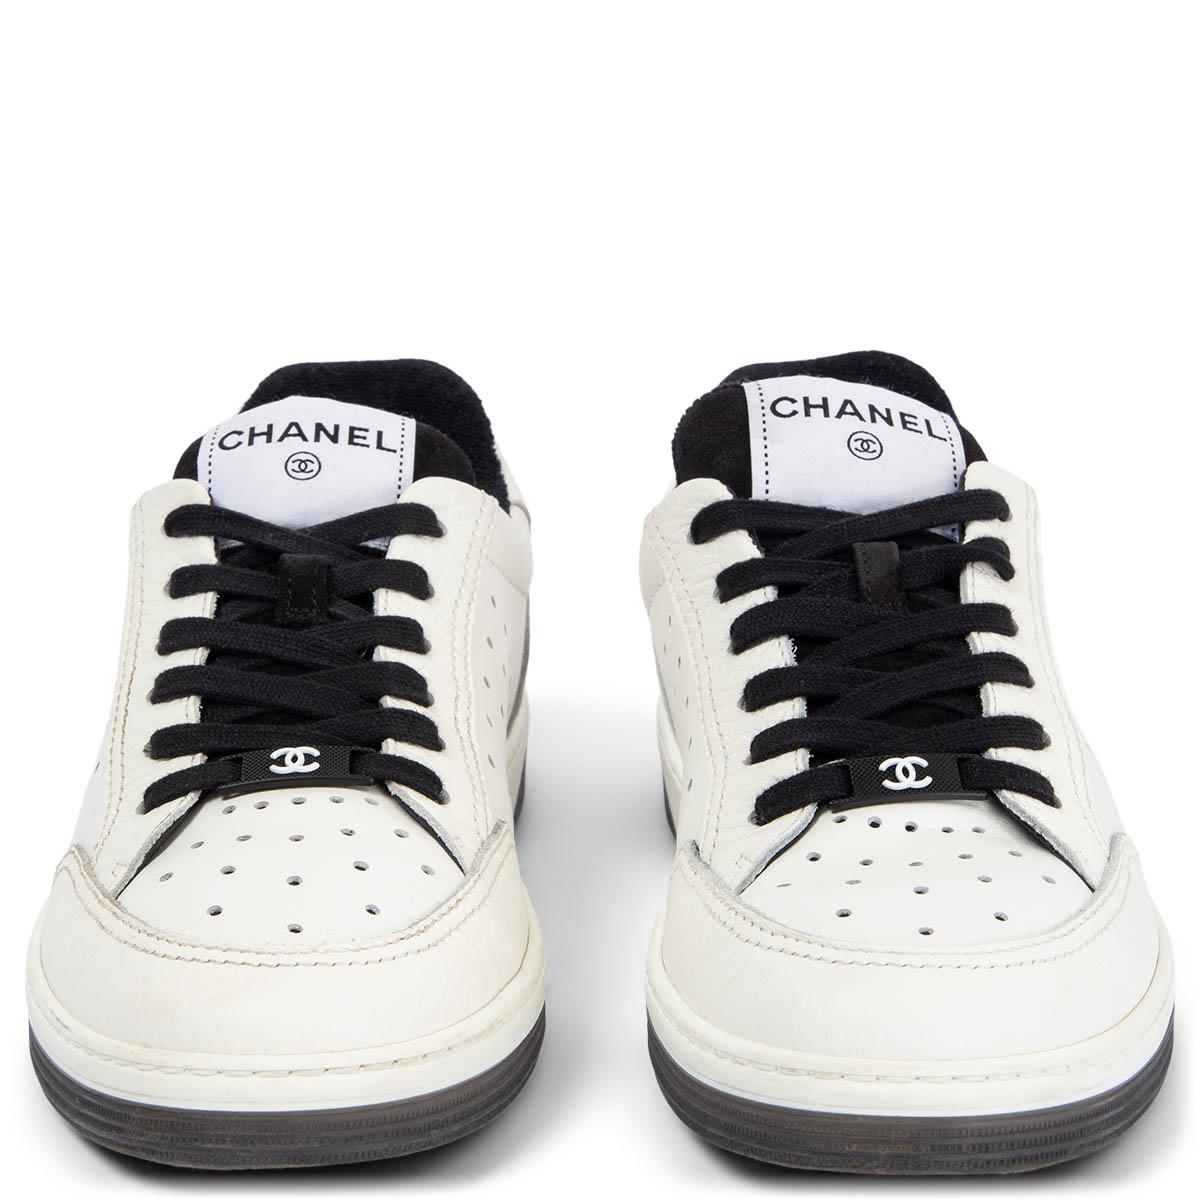 CHANEL, Shoes, Rare Exclusive Chanel Sneakers Fabric Suede Calfskin White  Ivory